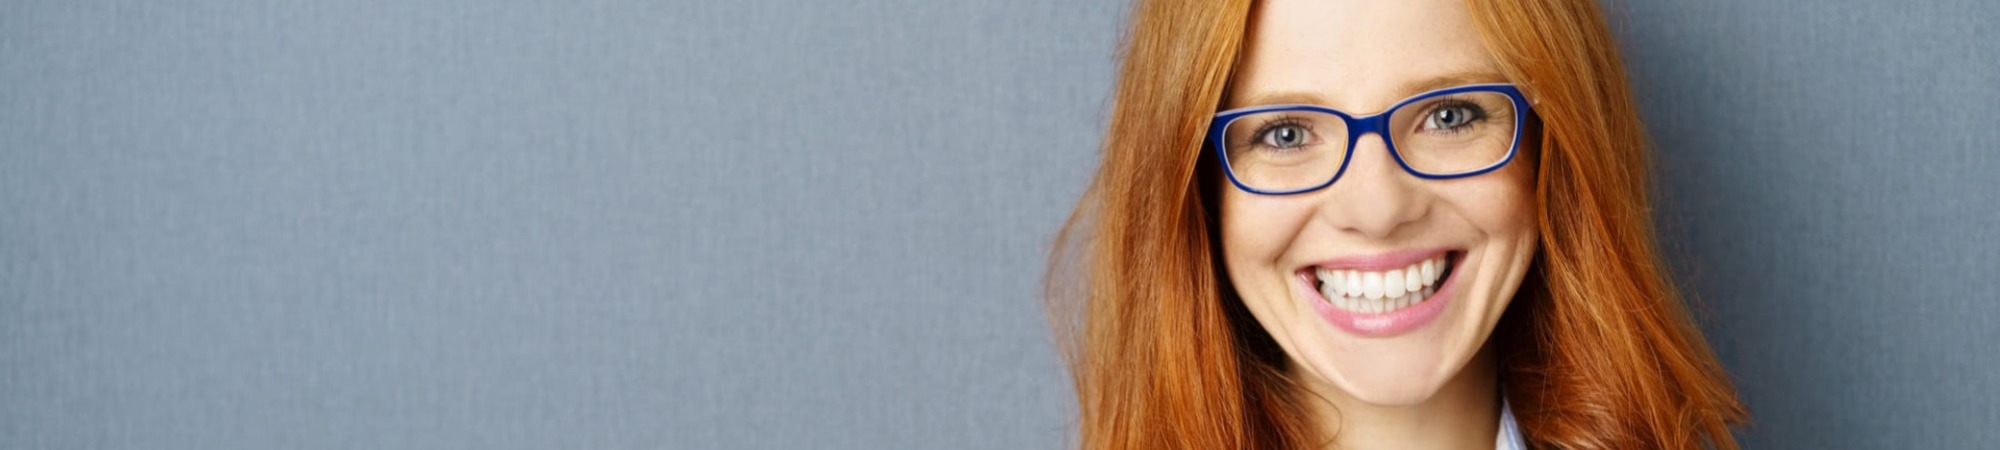 Portrait of young red-haired woman wearing glasses against grey background